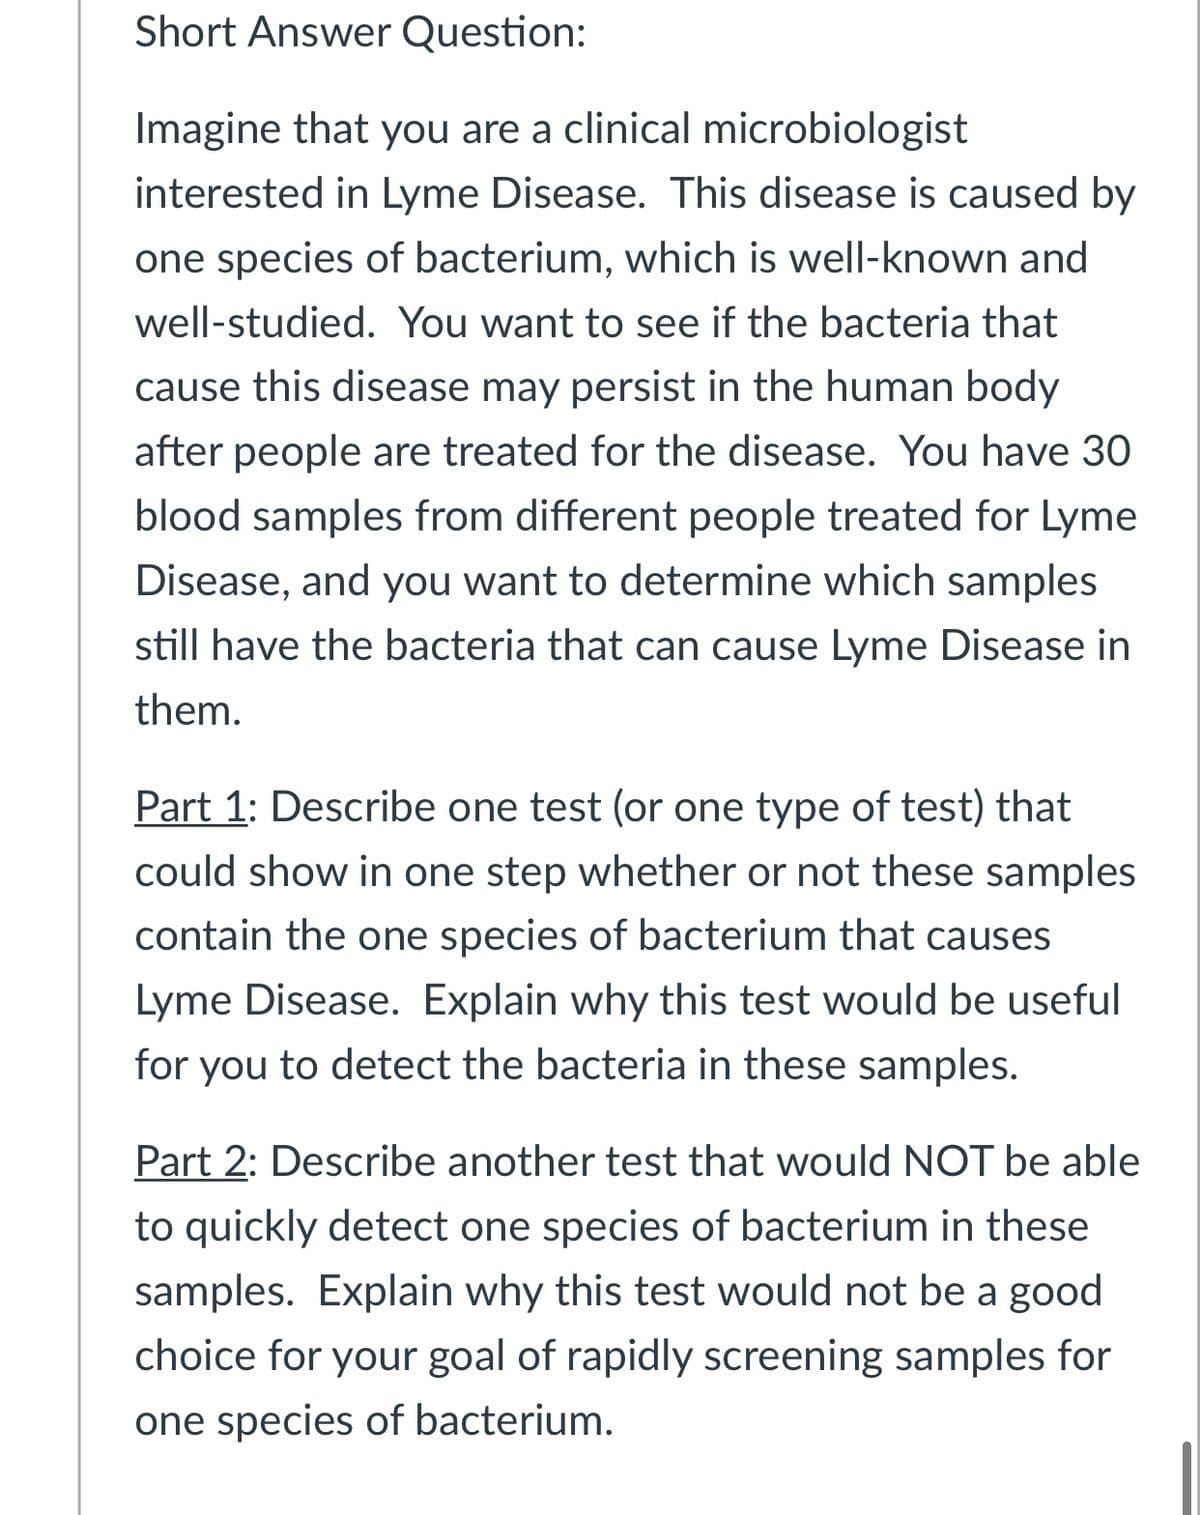 Short Answer Question:
Imagine that you are a clinical microbiologist
interested in Lyme Disease. This disease is caused by
one species of bacterium, which is well-known and
well-studied. You want to see if the bacteria that
cause this disease may persist in the human body
after people are treated for the disease. You have 30
blood samples from different people treated for Lyme
Disease, and you want to determine which samples
still have the bacteria that can cause Lyme Disease in
them.
Part 1: Describe one test (or one type of test) that
could show in one step whether or not these samples
contain the one species of bacterium that causes
Lyme Disease. Explain why this test would be useful
for you to detect the bacteria in these samples.
Part 2: Describe another test that would NOT be able
to quickly detect one species of bacterium in these
samples. Explain why this test would not be a good
choice for your goal of rapidly screening samples for
one species of bacterium.
